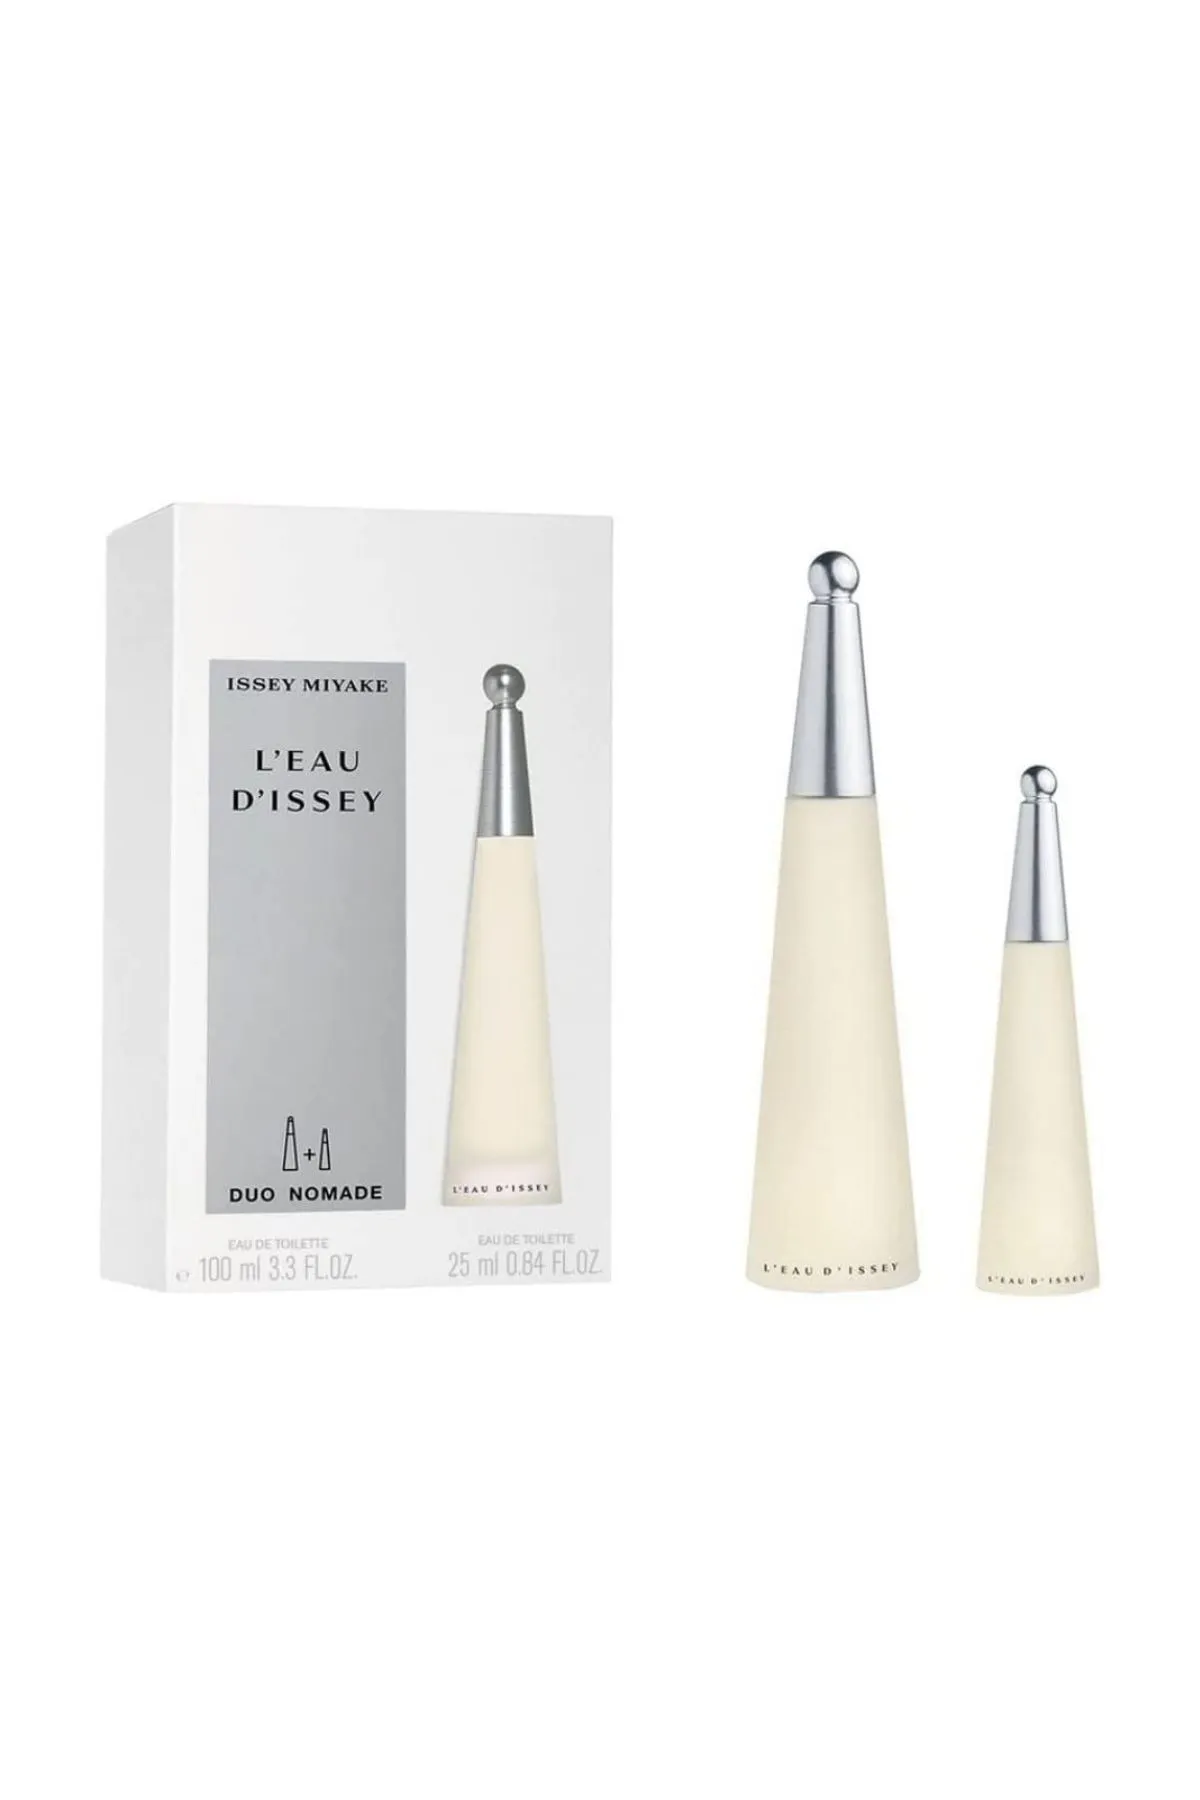 Issey Miyake L'eau D'issey Edt 100 ml Set